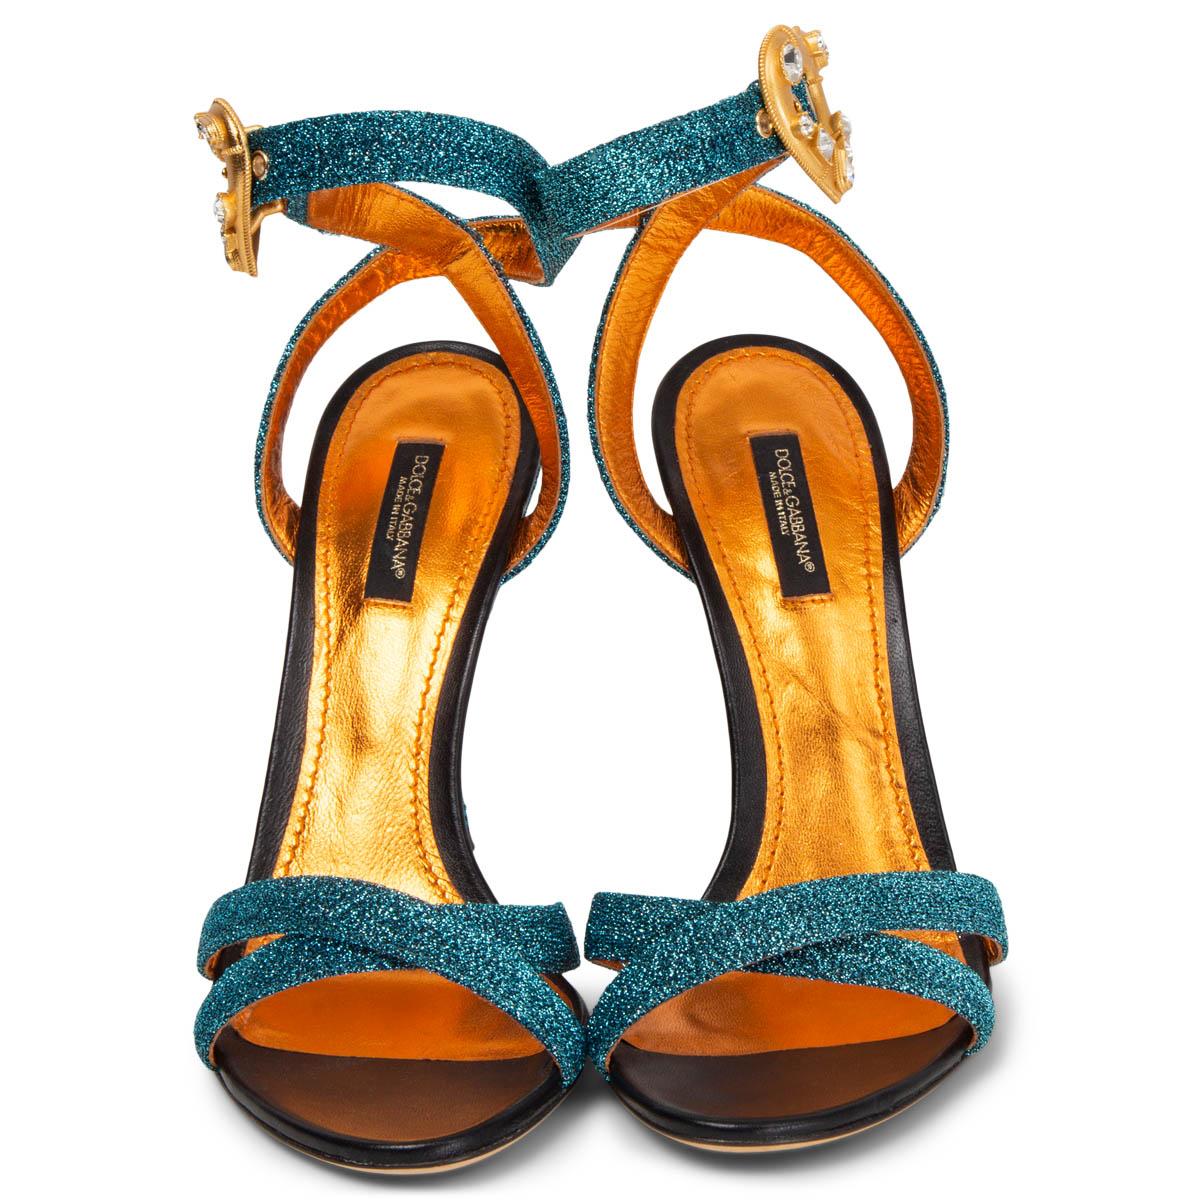 100% authentic Dolce & Gabbana sandals in turquoise metallic soft lurex fabric. The design features crisscrossing bands at the toe and a slim ankle strap with a golden crystal-embellished metal heart. Have bee worn once inside and are in virtually